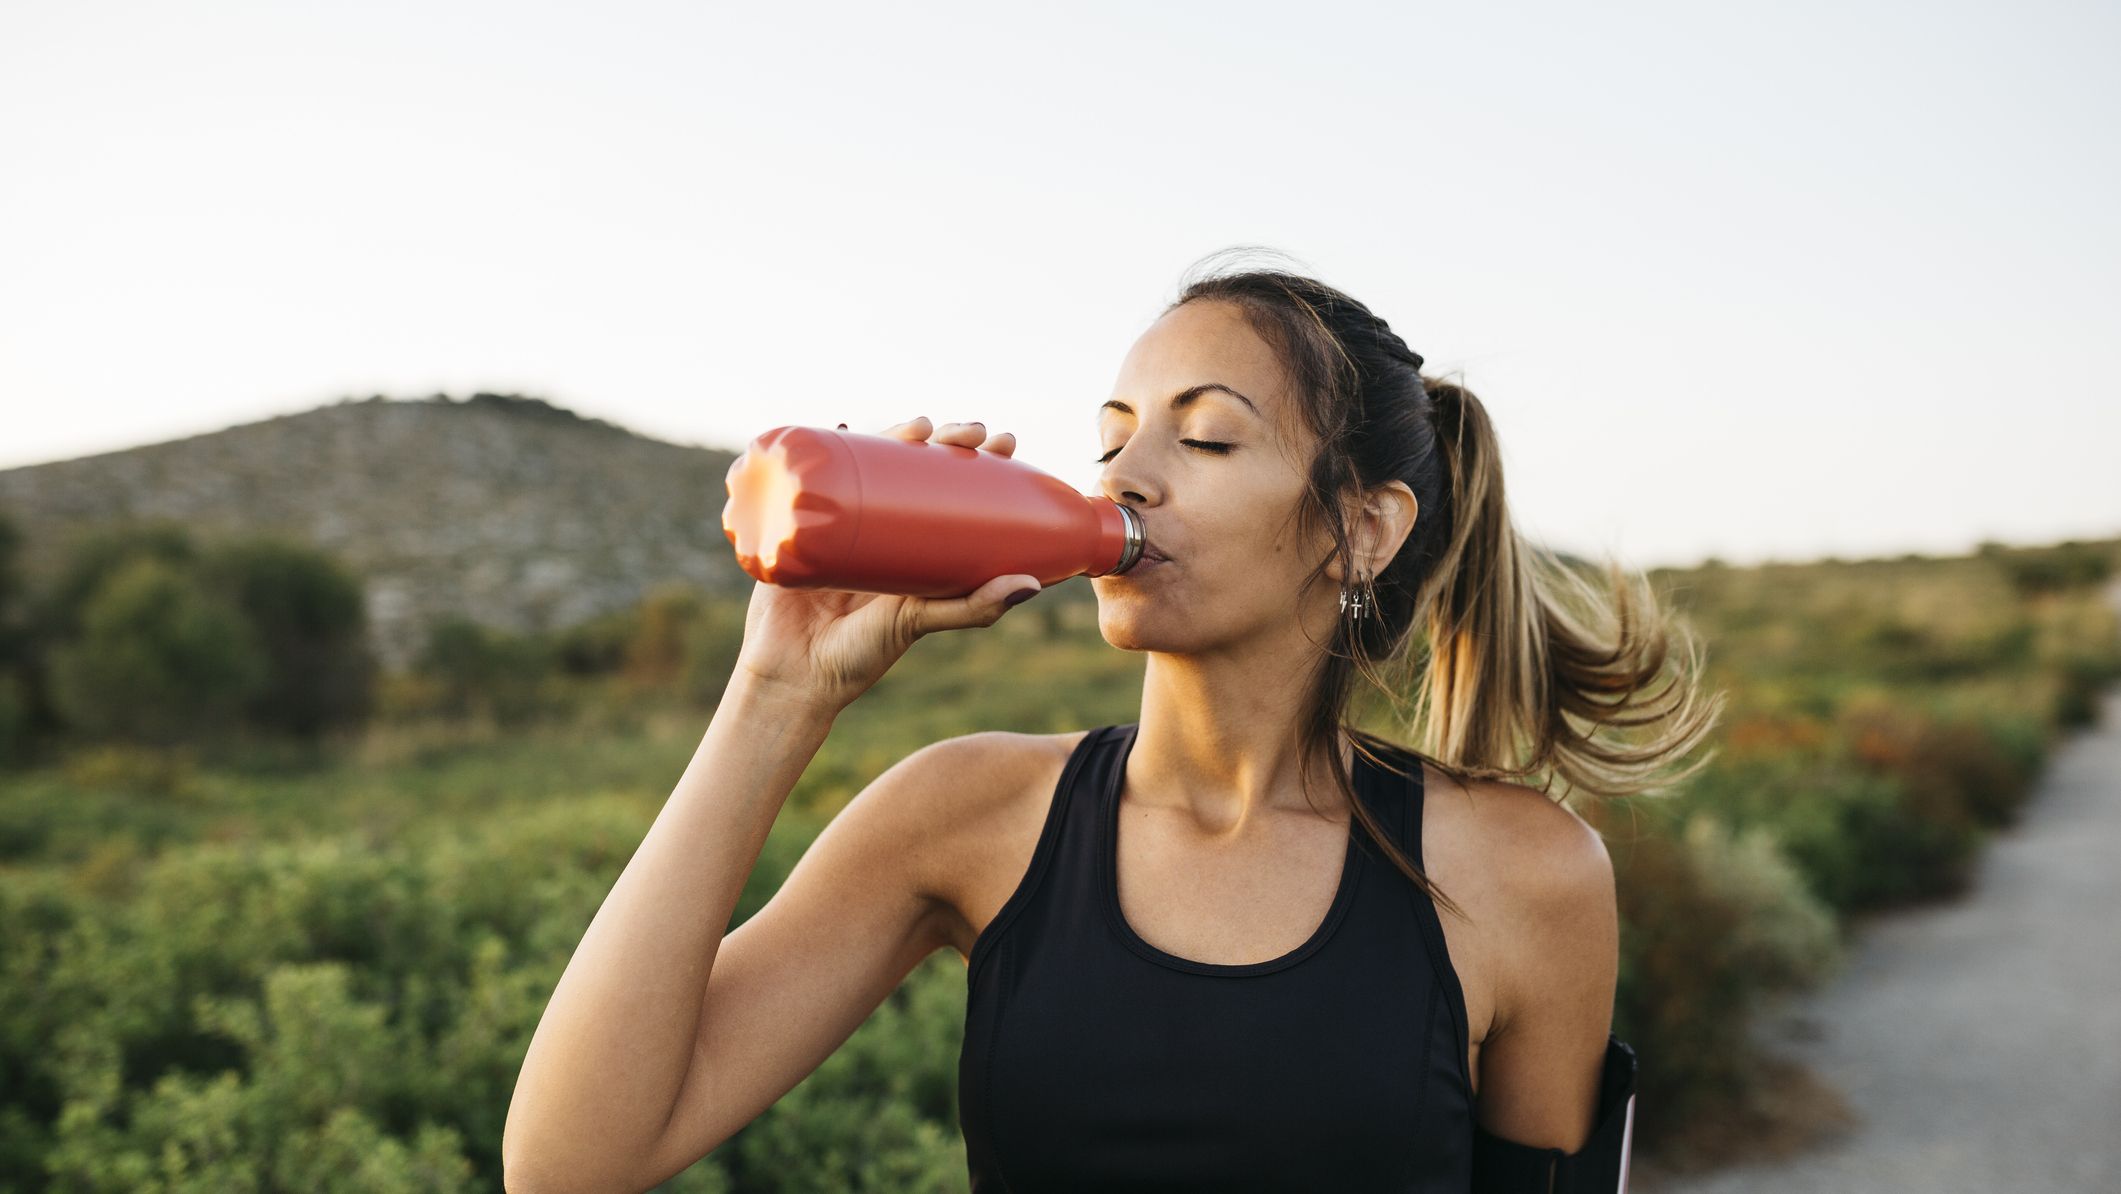 https://hips.hearstapps.com/hmg-prod/images/woman-drinking-water-after-workout-royalty-free-image-1697127089.jpg?crop=1xw:0.84415xh;center,top